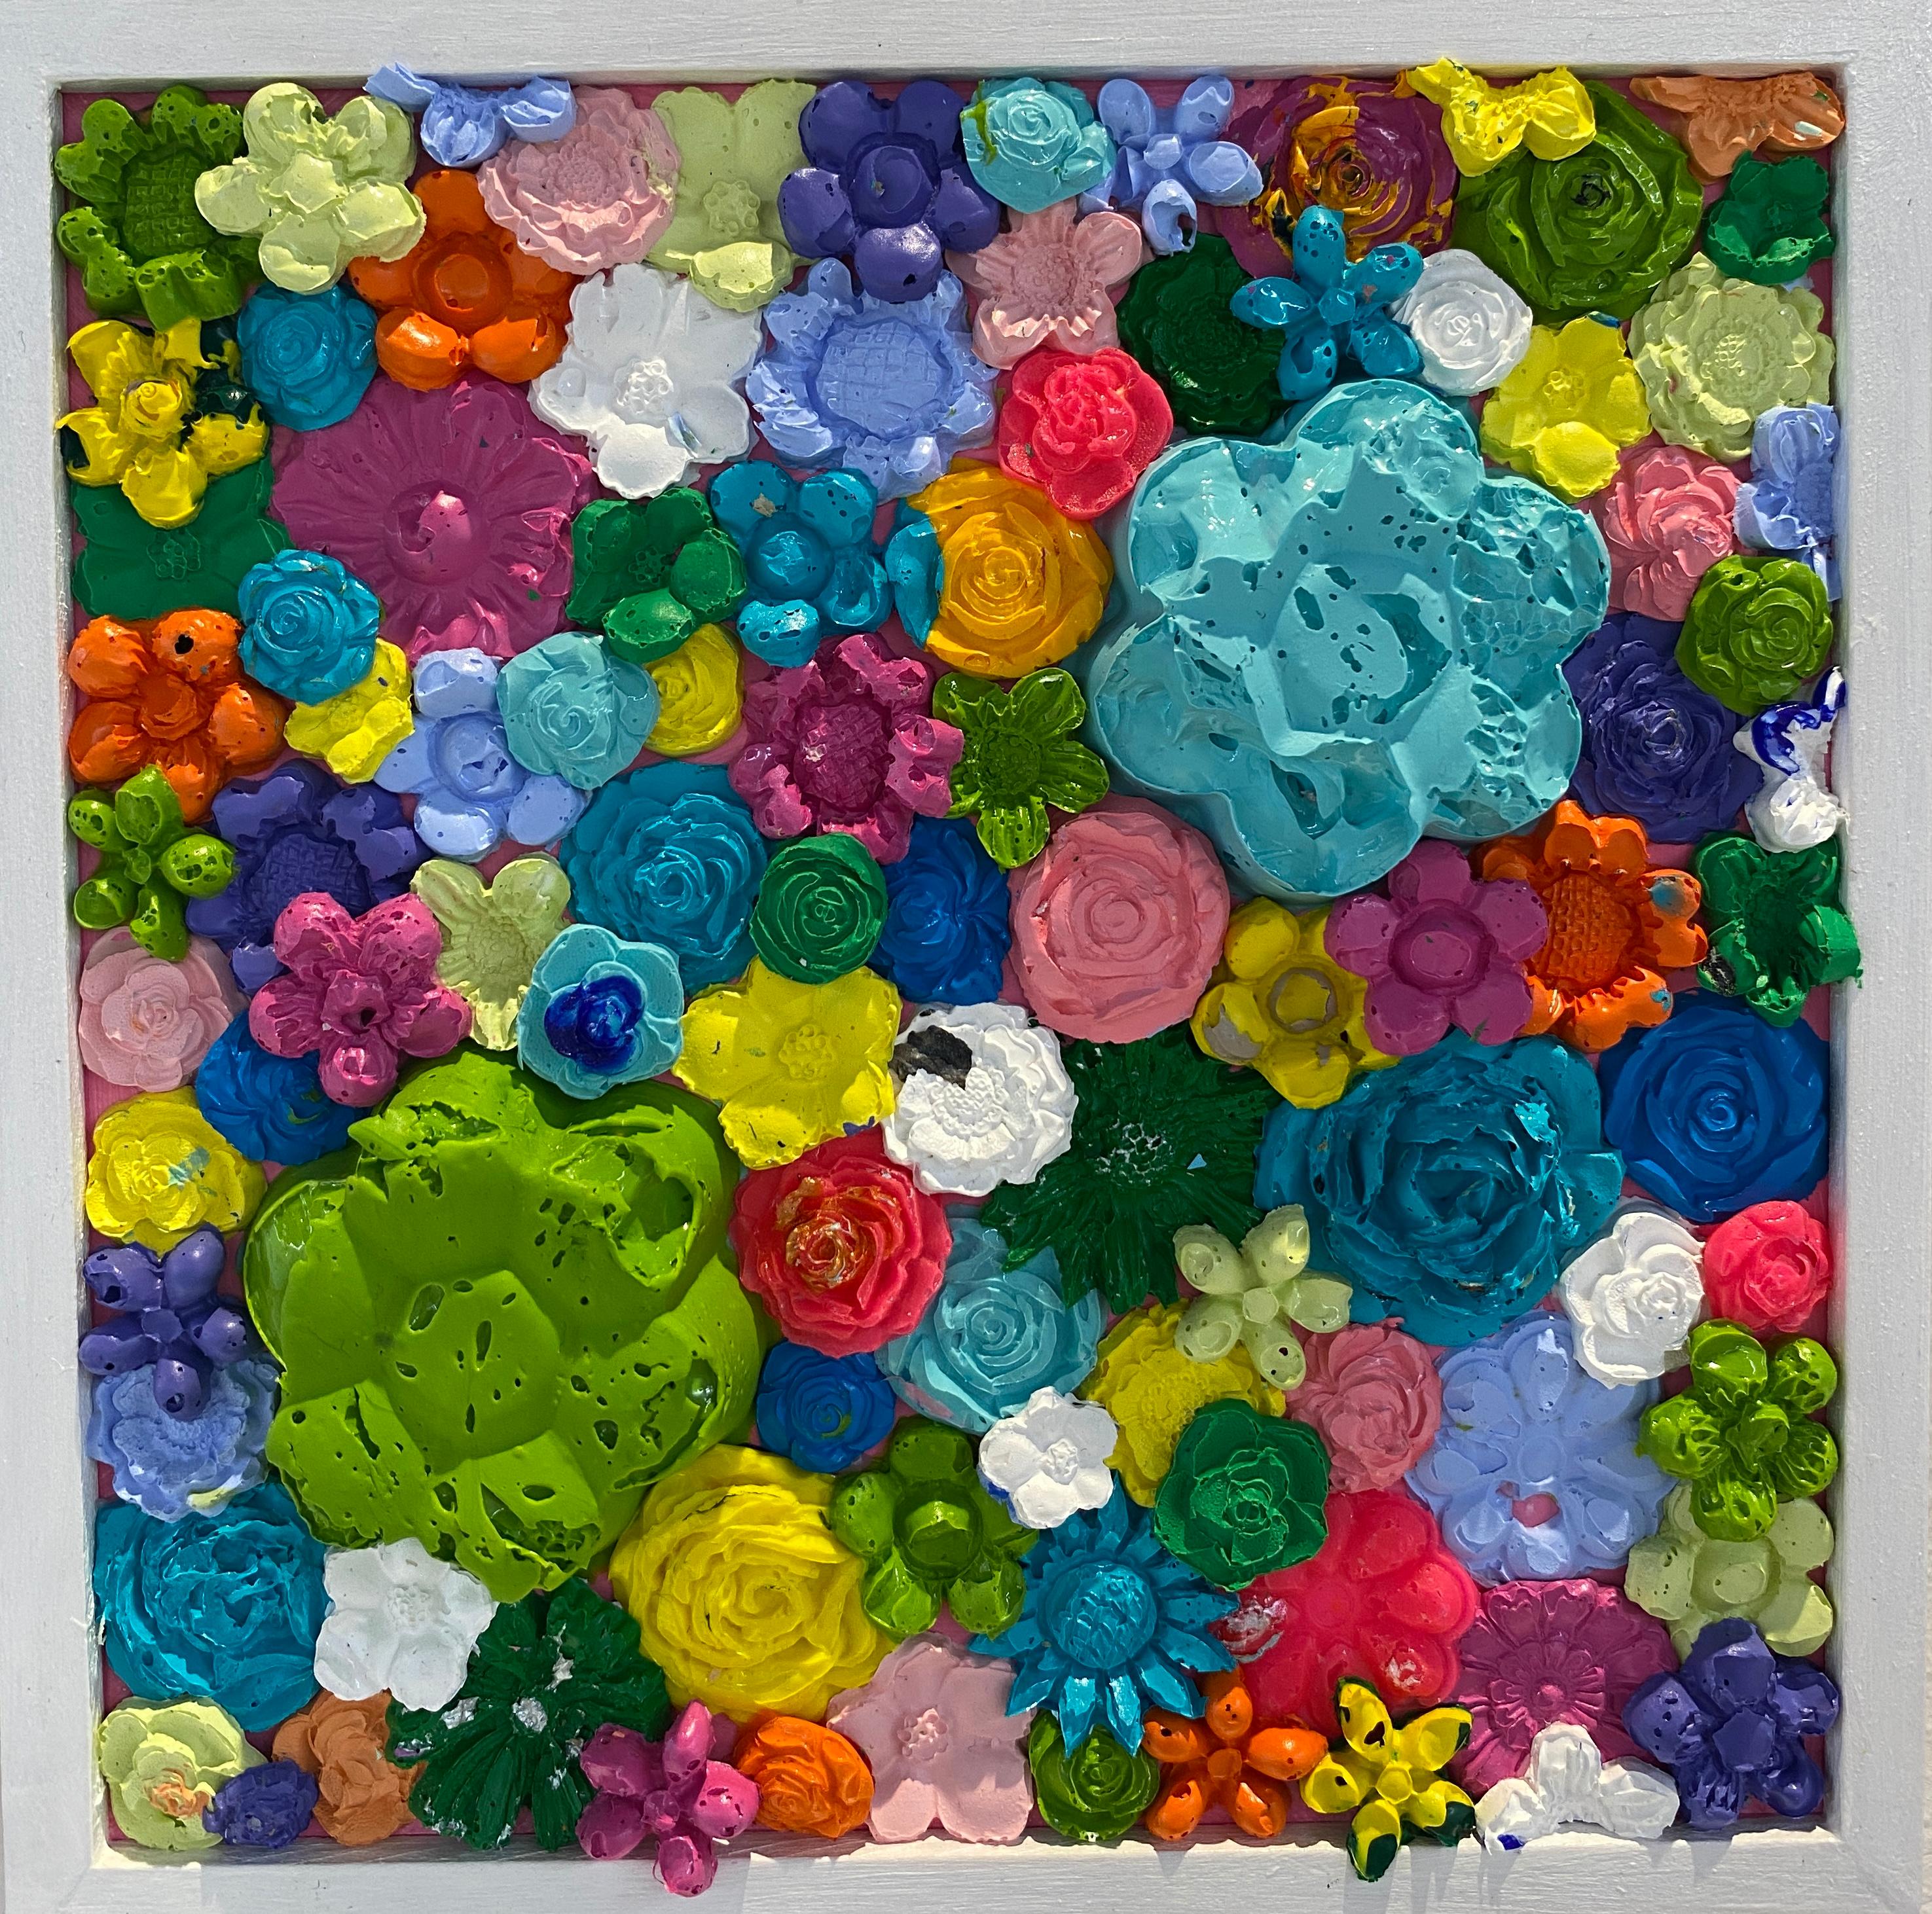 FLOWER TAPESTRY 2 - Framed, Textured, Sculptural, Molded Acrylic Painting - Sculpture by Natalie Harrison